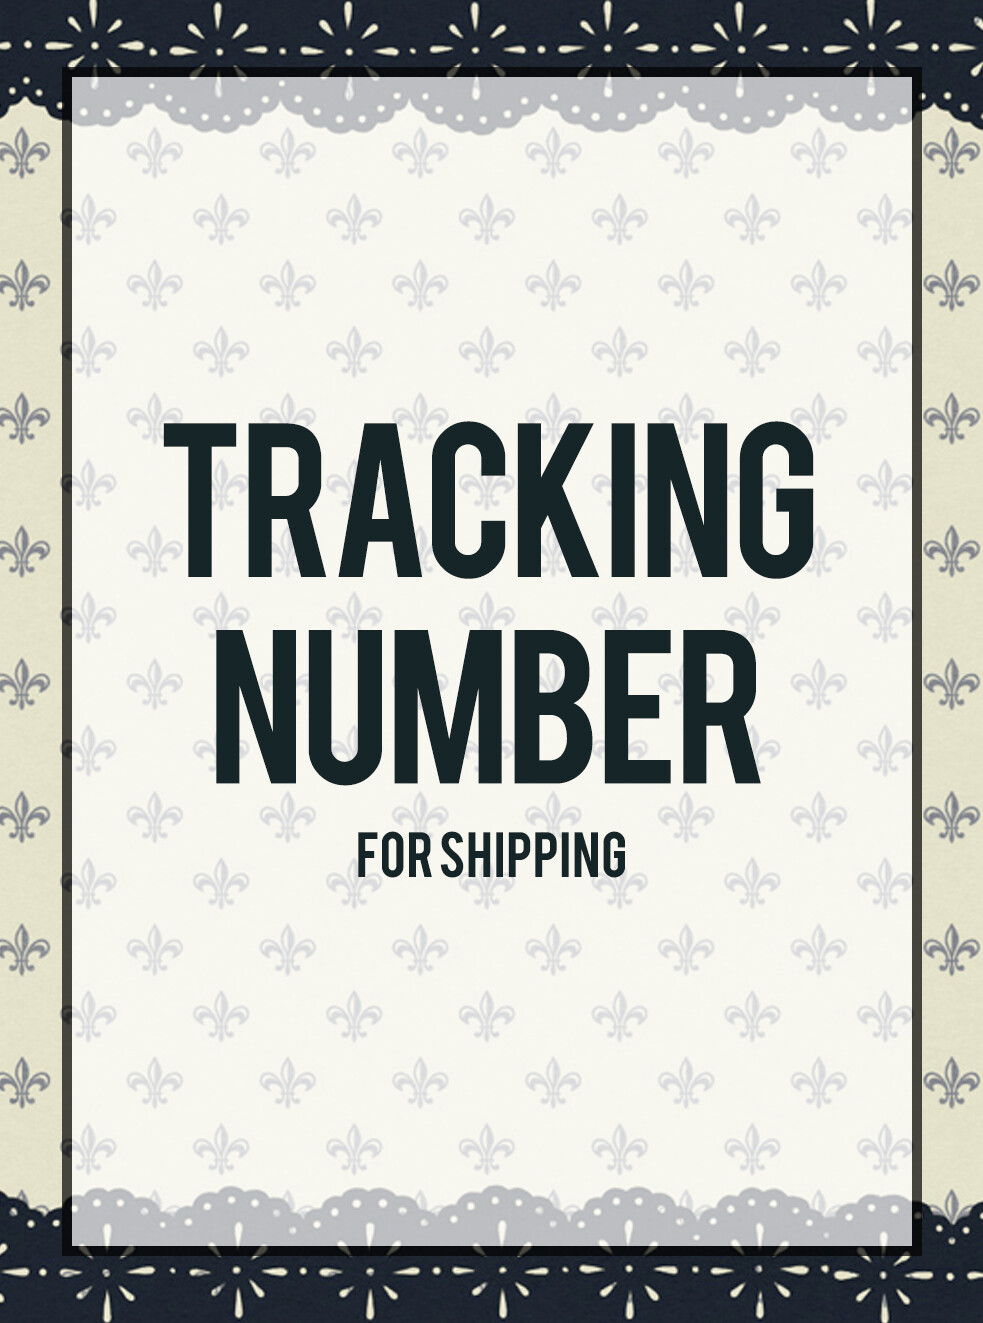 Tracking Number